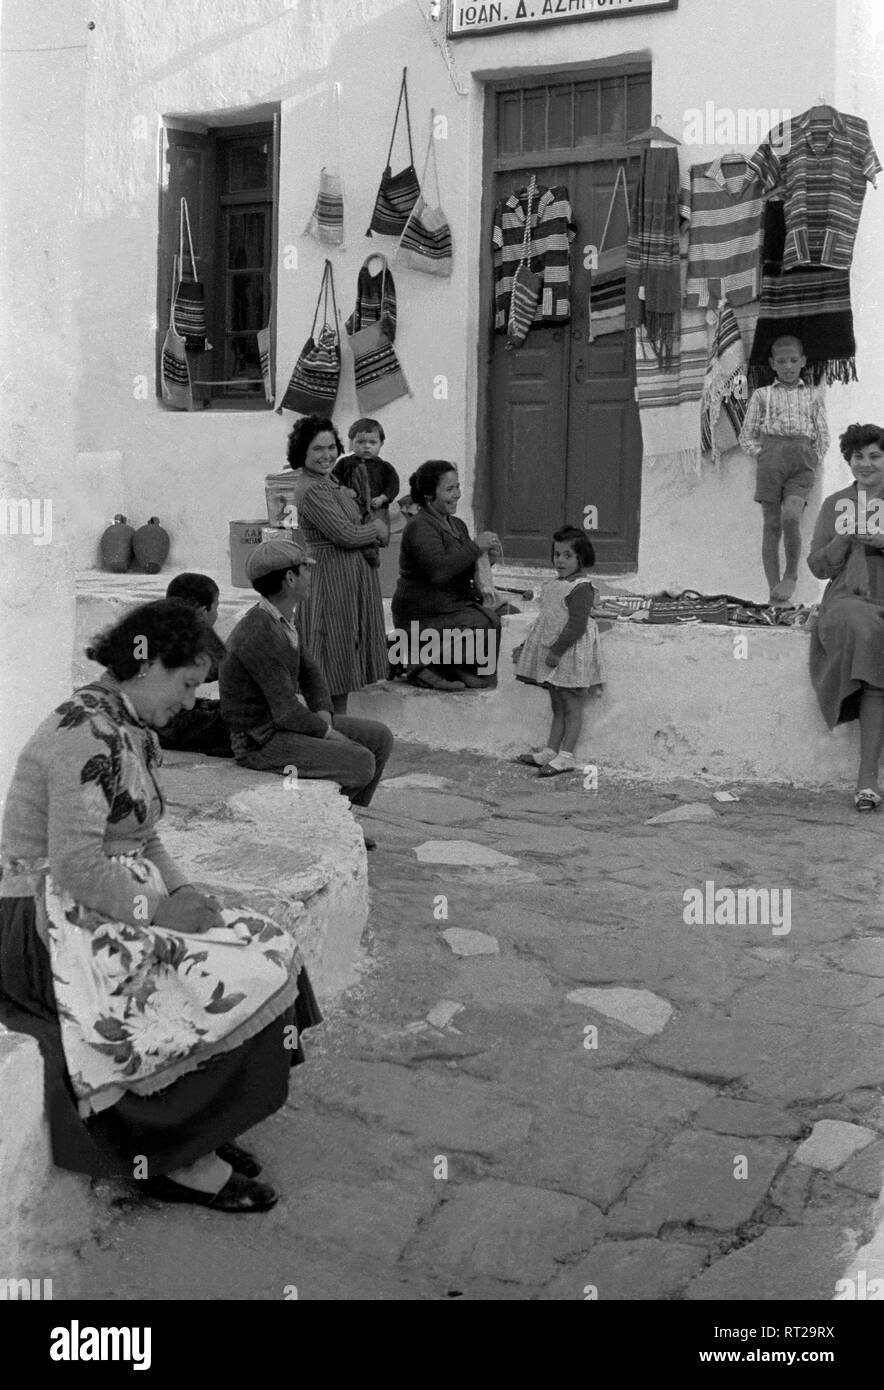 Griechenland, Greece - Greece, 1950s. Greek women with souvenirs for tourists. Photo by Erich Andres Griechenland - Frauen stellen Souvenirs für die Touristen her. Stock Photo